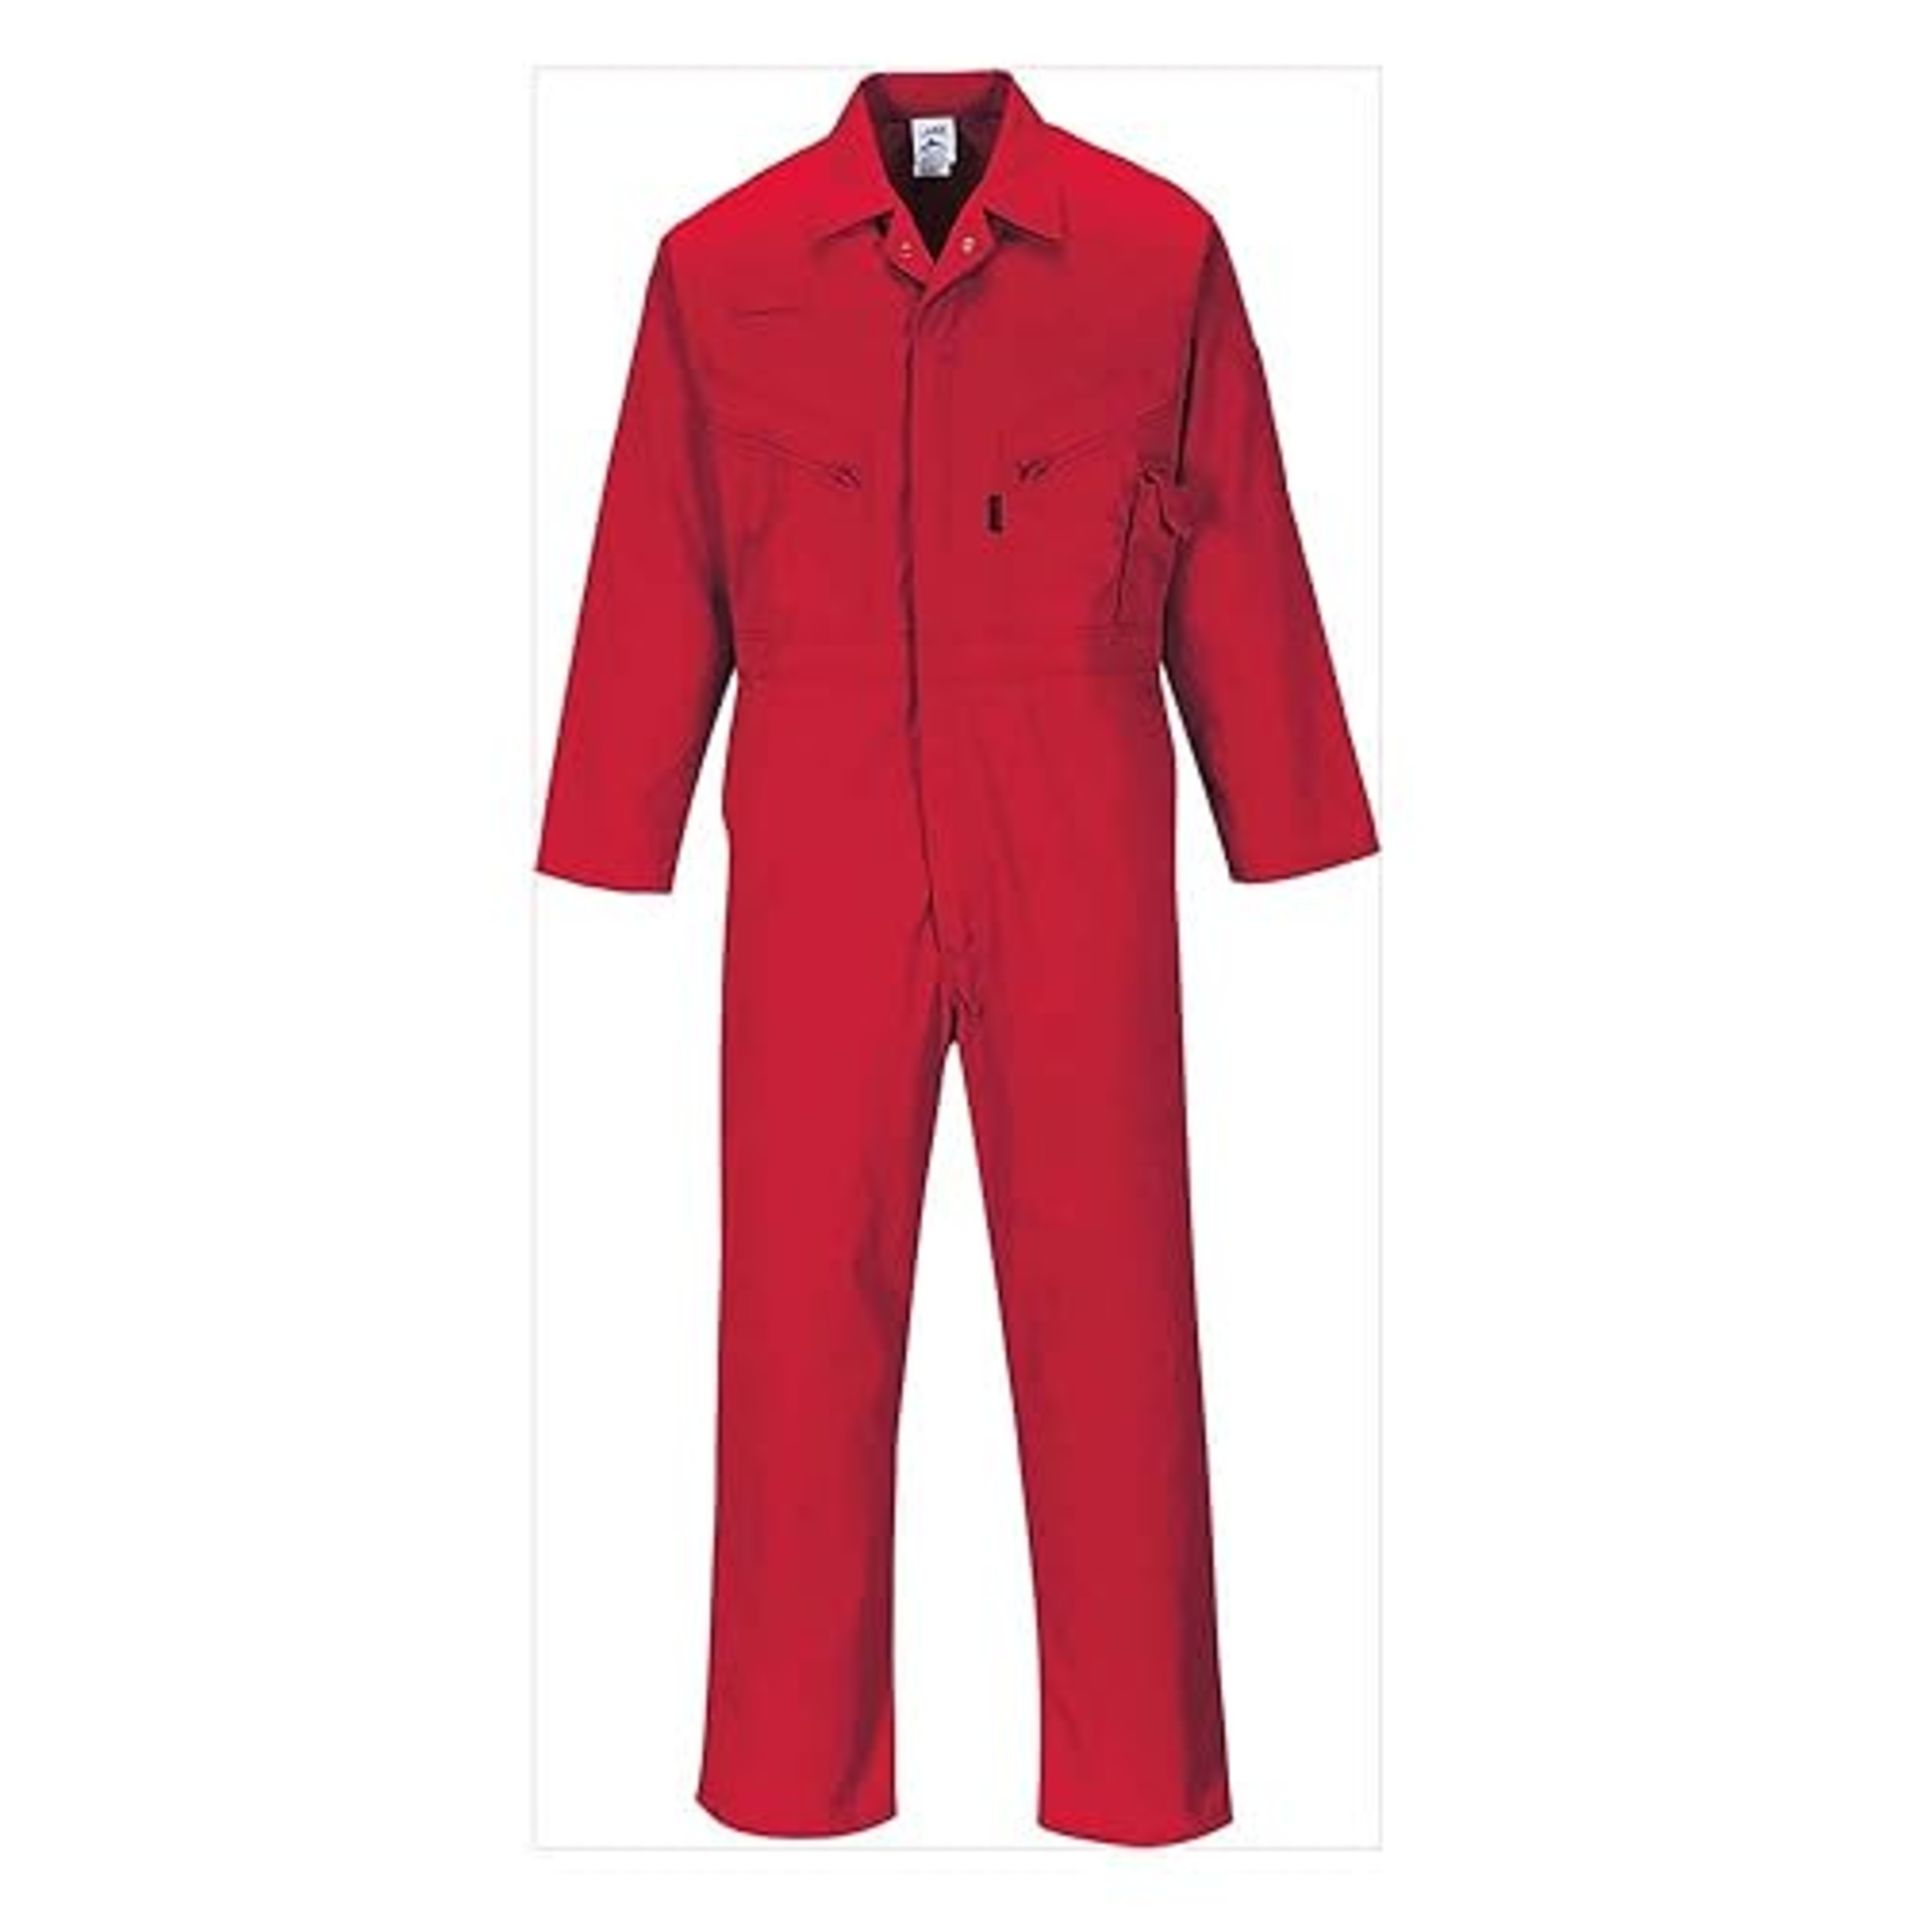 Portwest C813 Men's Liverpool Lightweight Safety Coverall Boiler Suit Overalls Red, 3X-Large